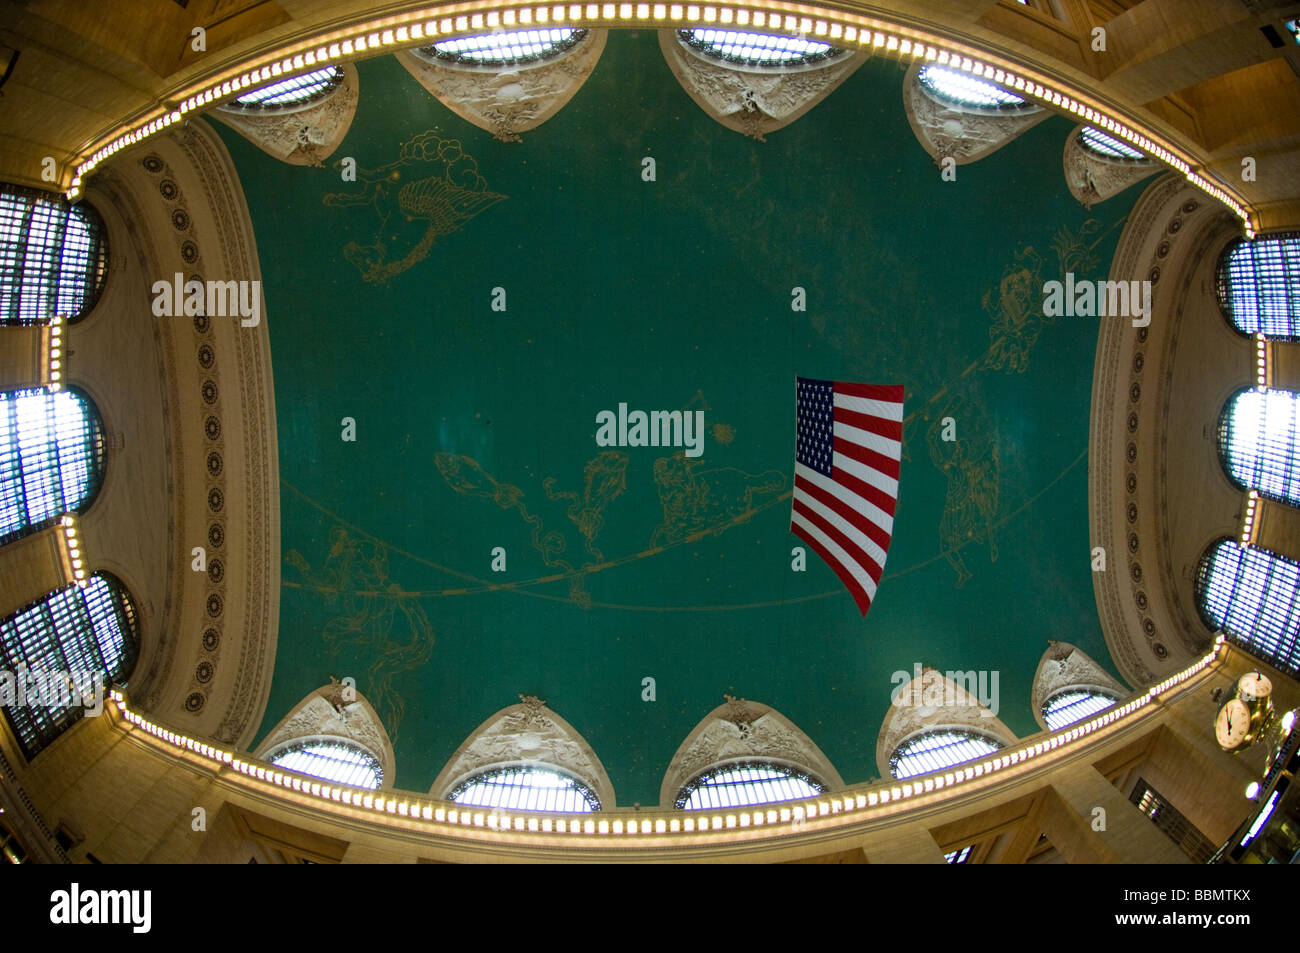 The Ceiling In Grand Central Terminal Depicting Star